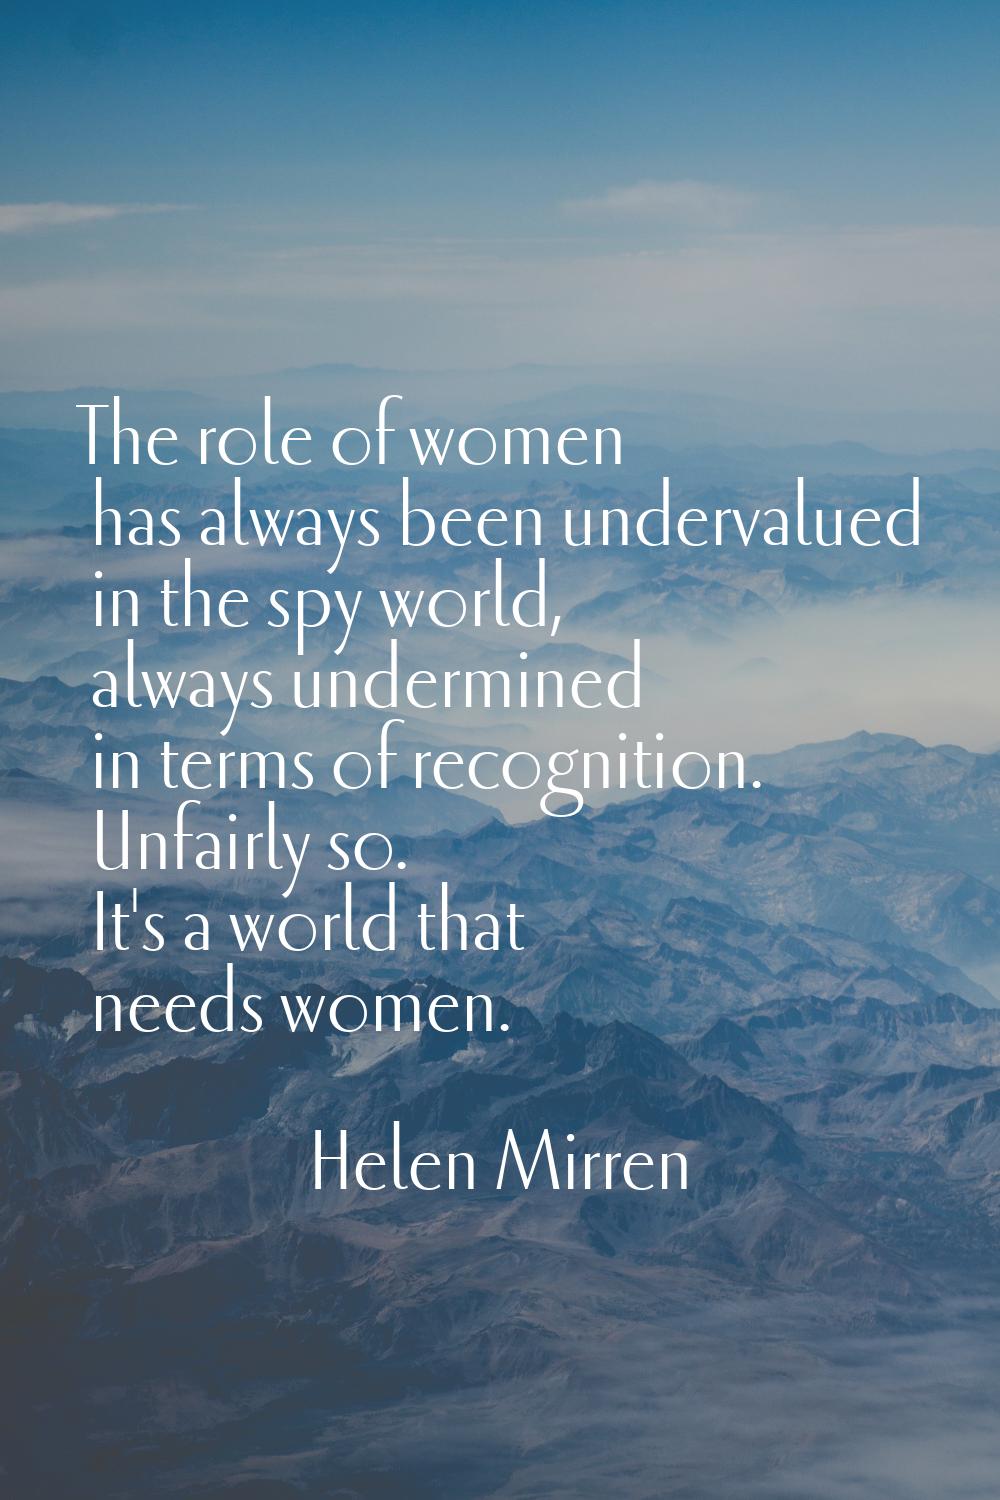 The role of women has always been undervalued in the spy world, always undermined in terms of recog